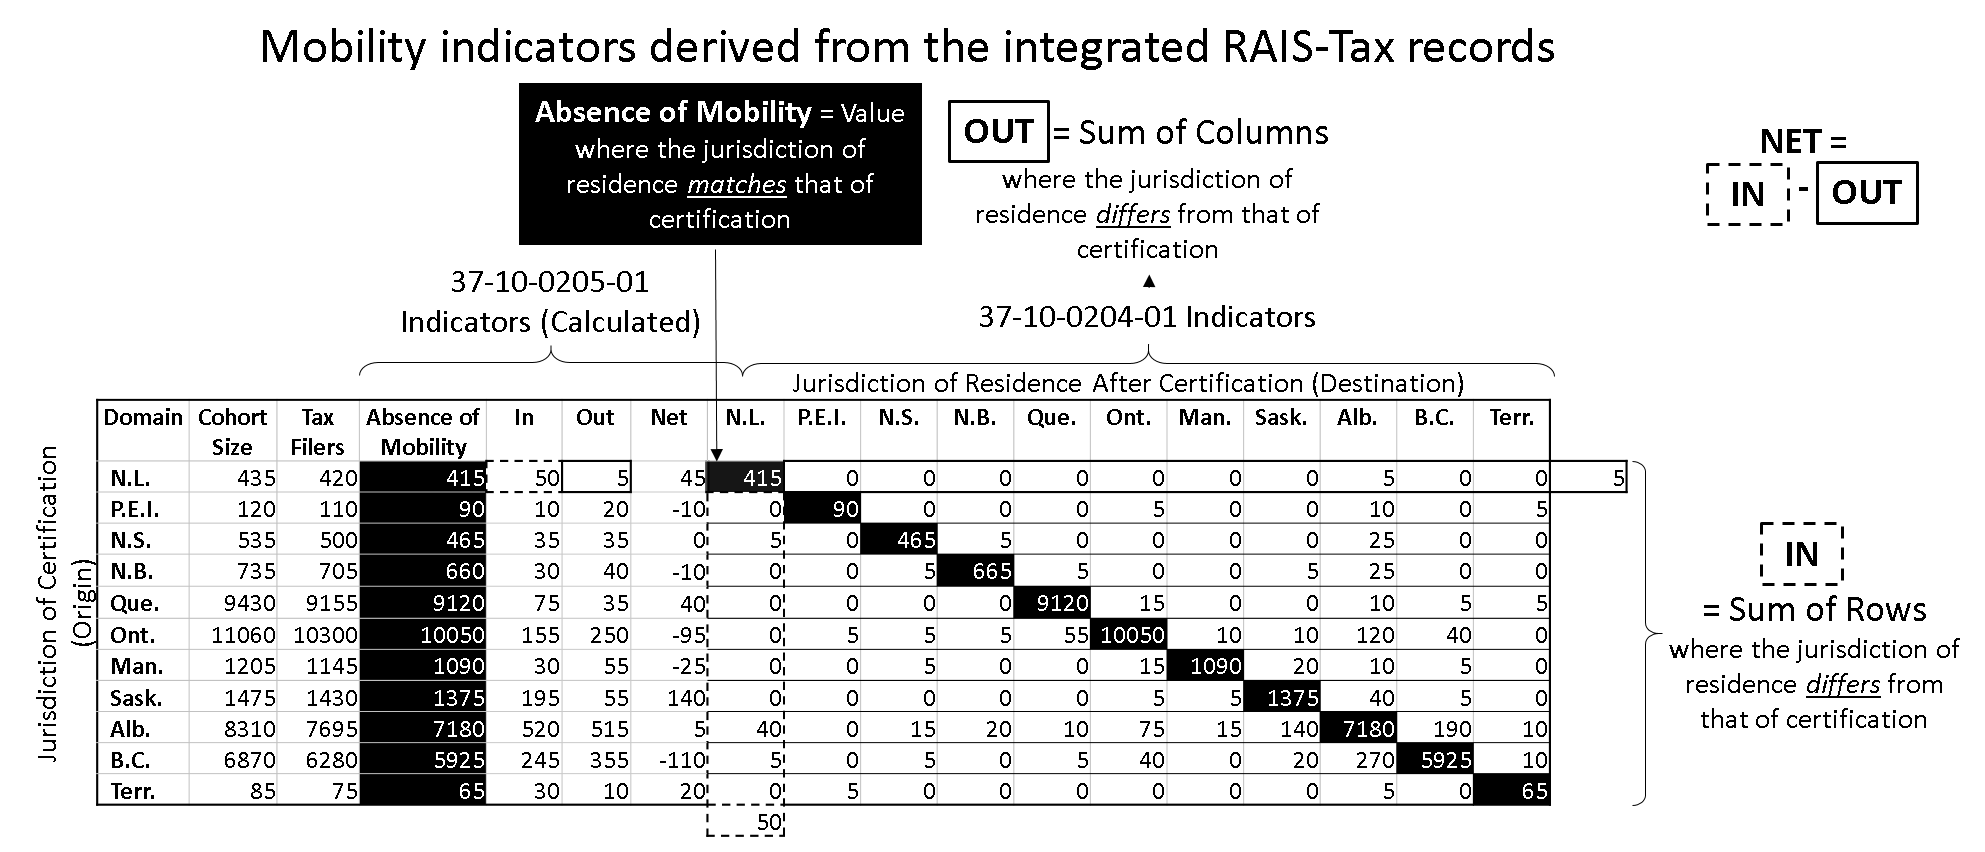 Mobility indicators derived from the integrated RAIS-Tax records